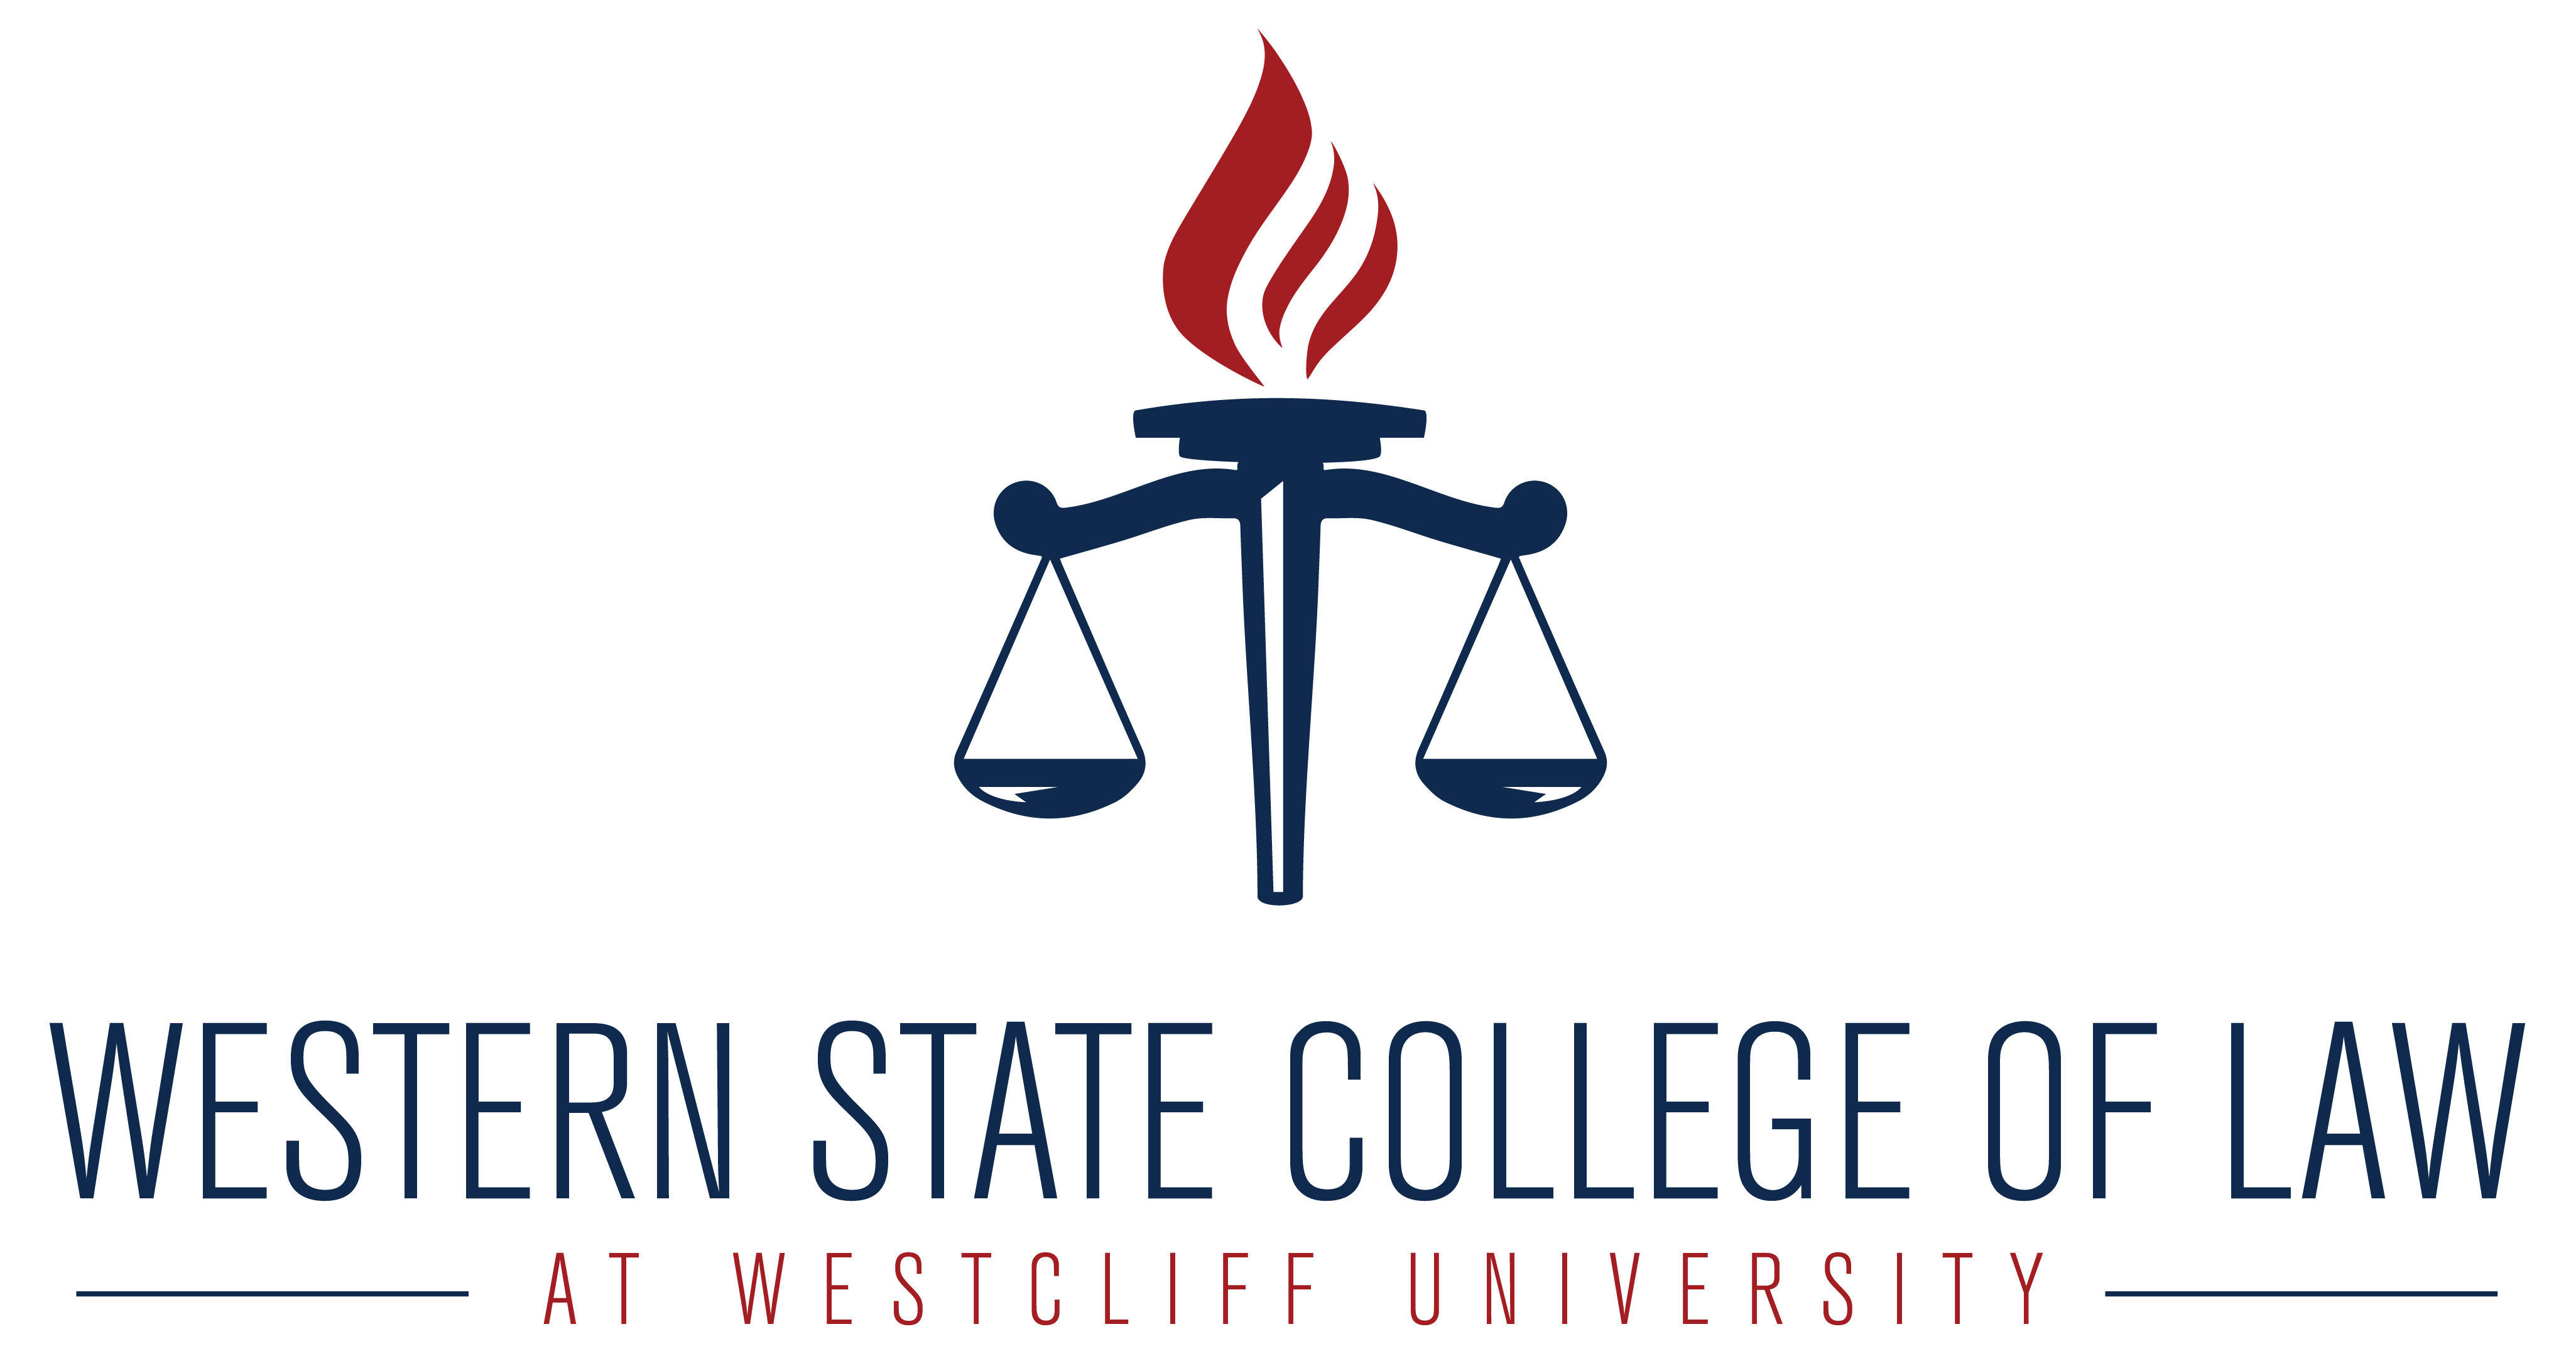 How To Apply | Western State College of Law